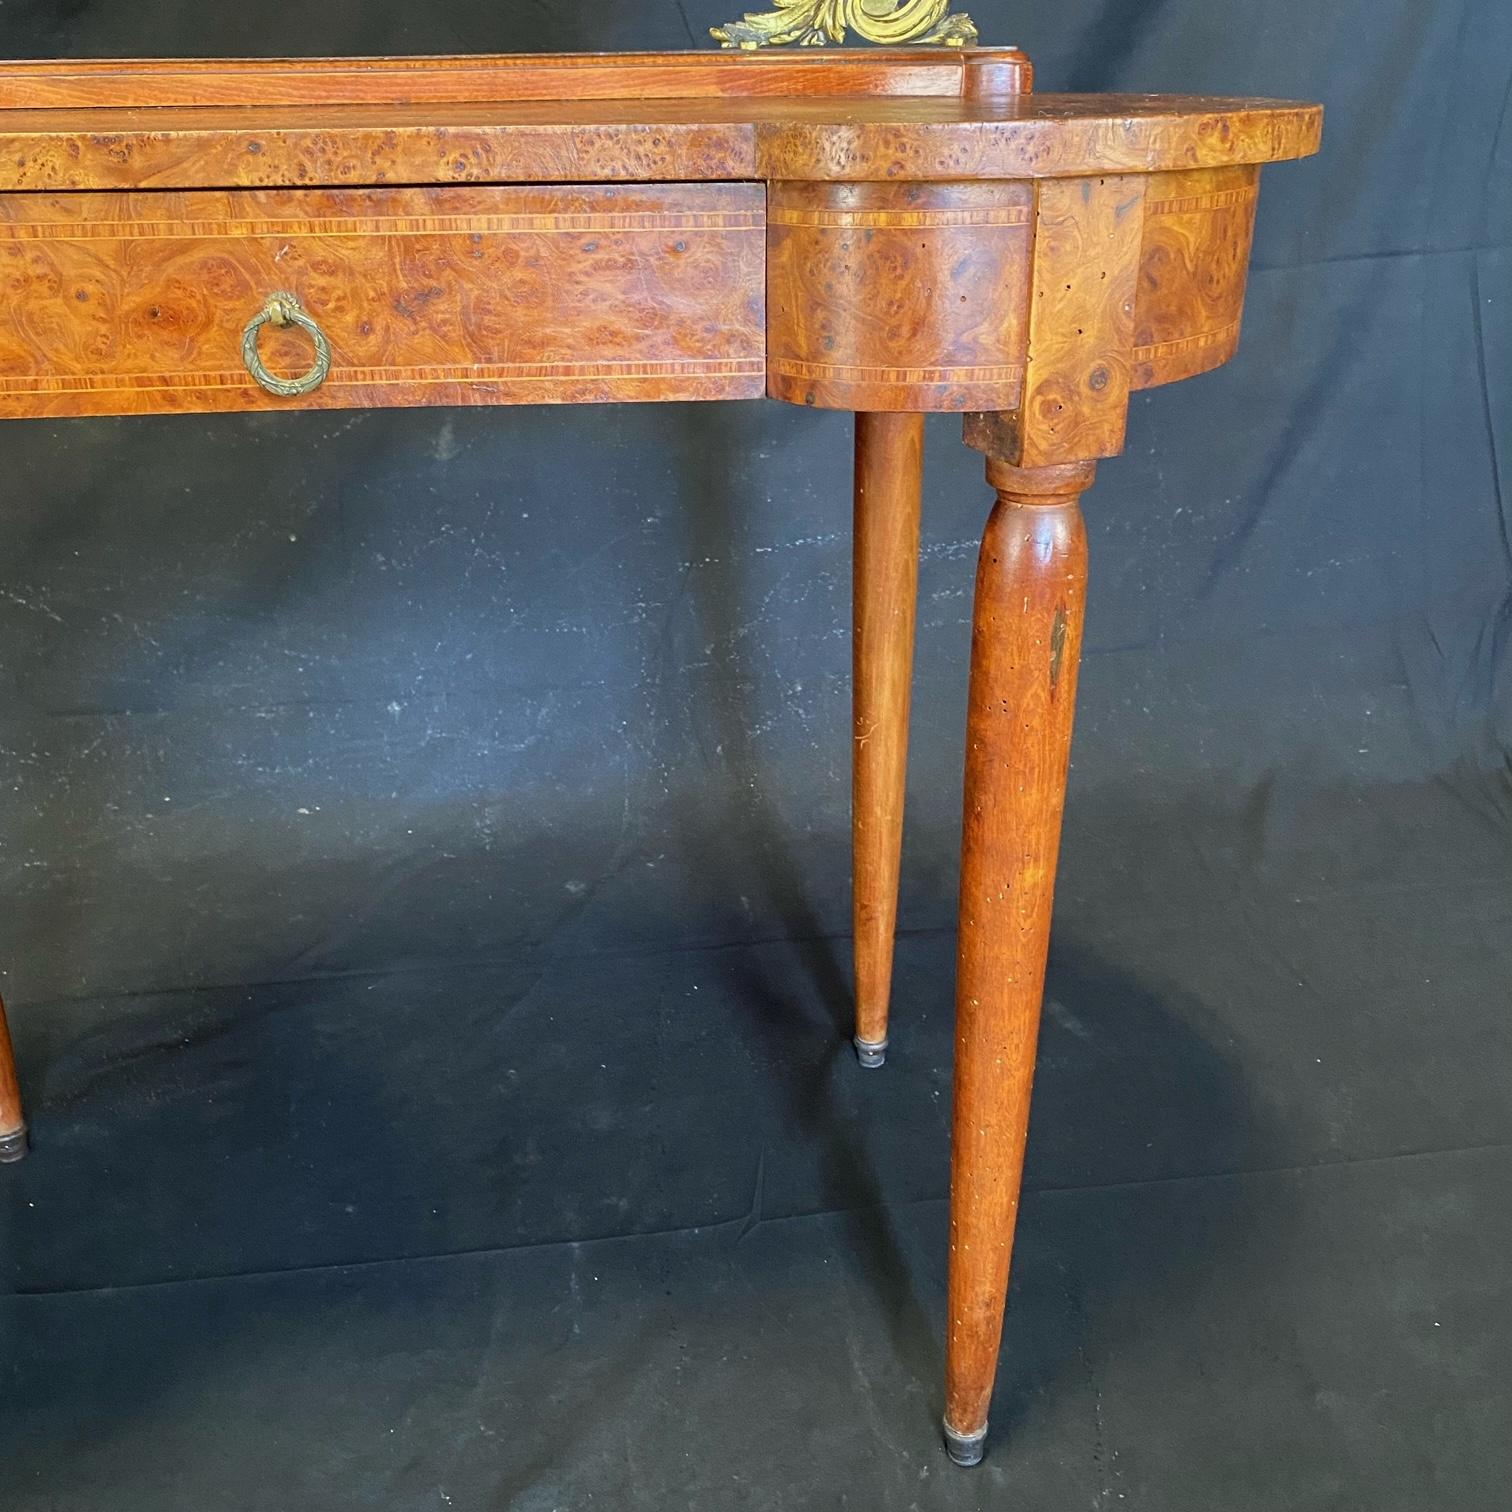 Elegant French Burled Walnut Dressing Table with Bronze Mounted Side Candelabra For Sale 5